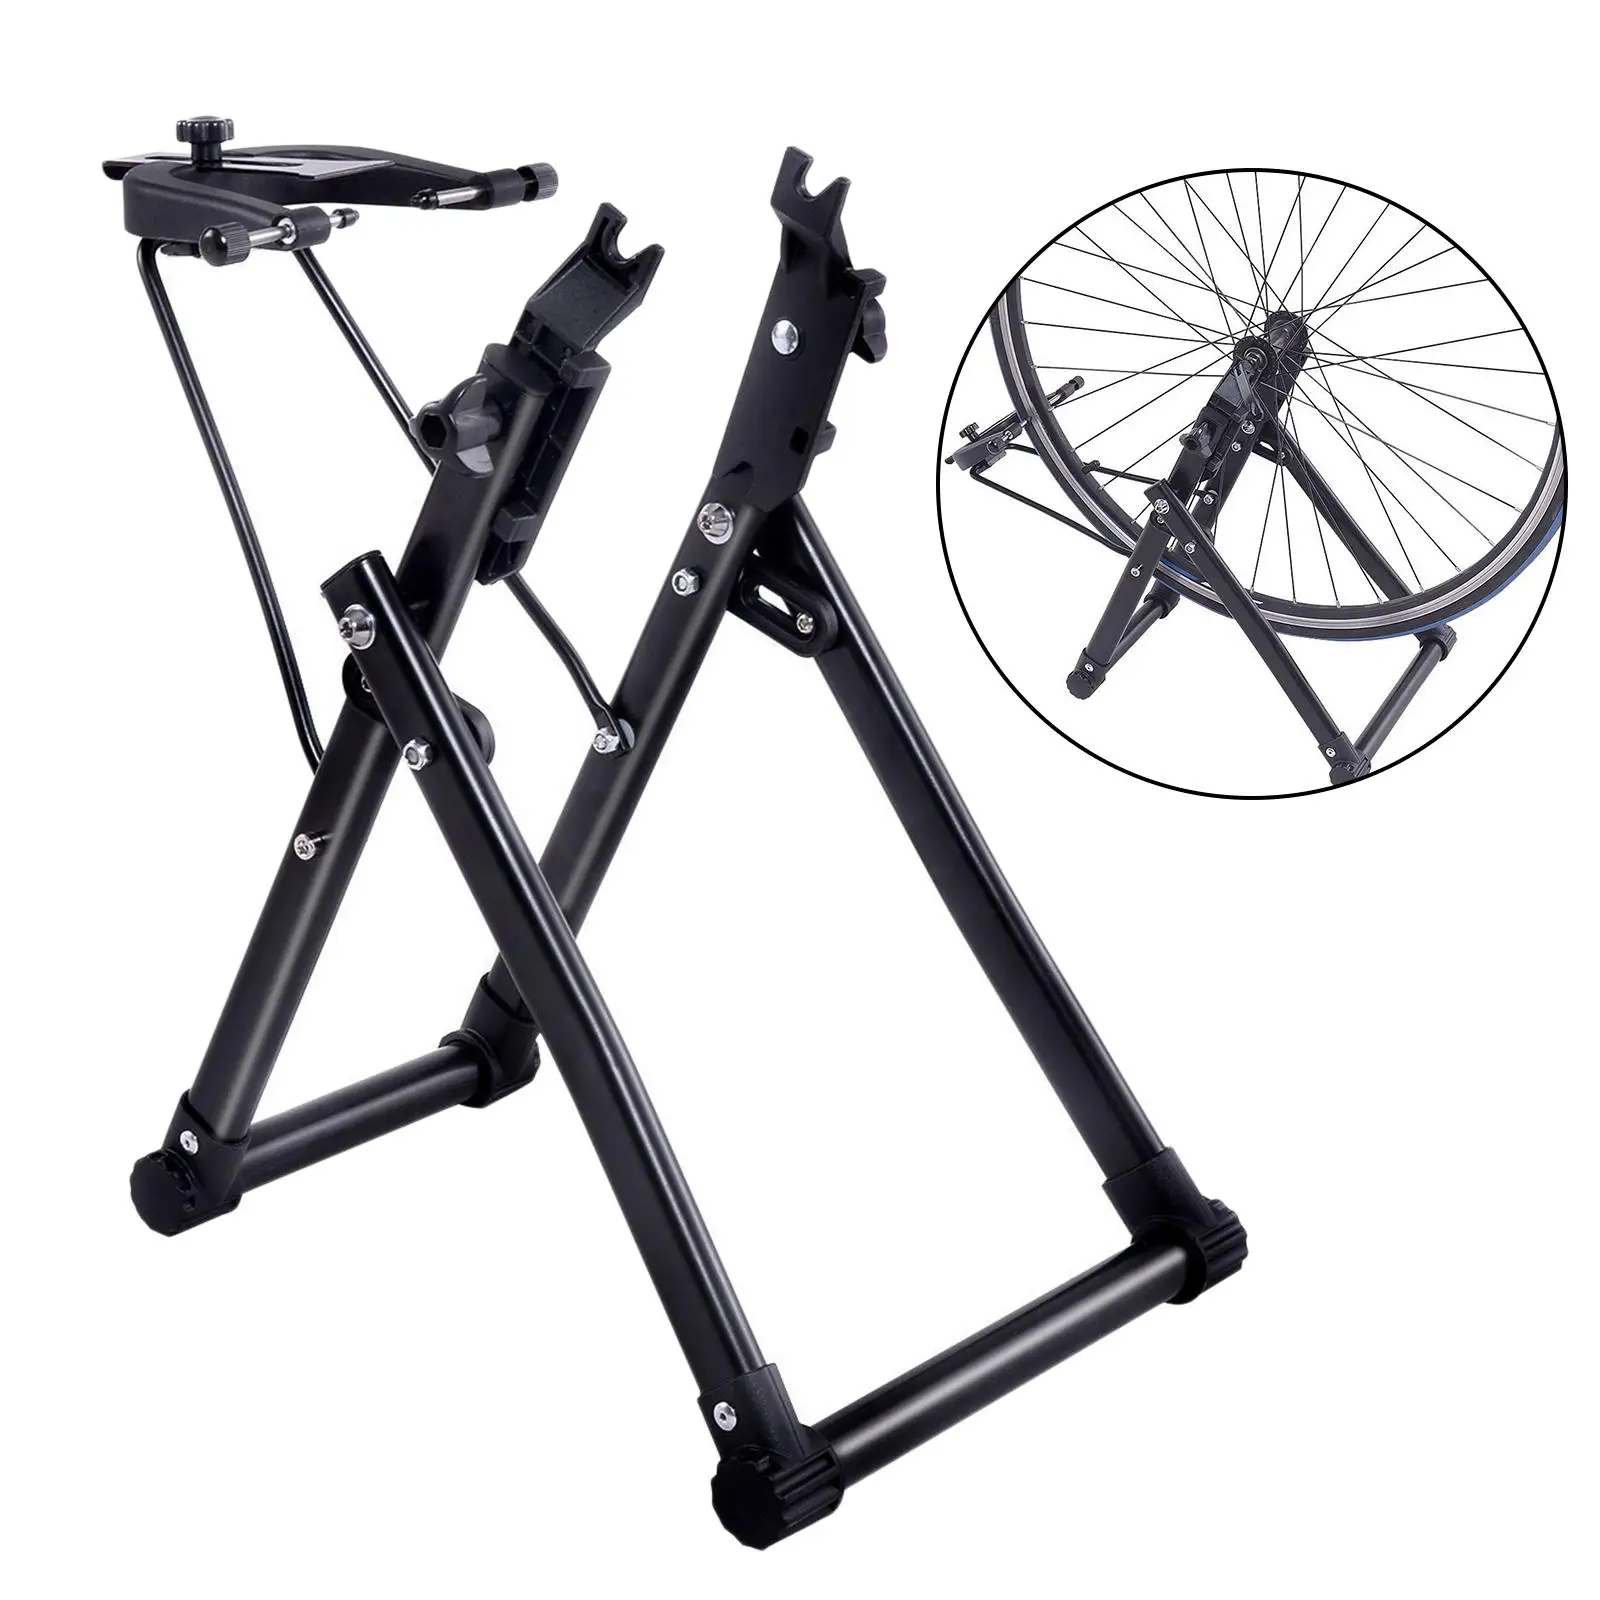 Bicycle Wheel Truing Stand Black Classic Delicate Wheel Home Maintenance Holder Support Bike Repair Tools for 16 to 29 Inches